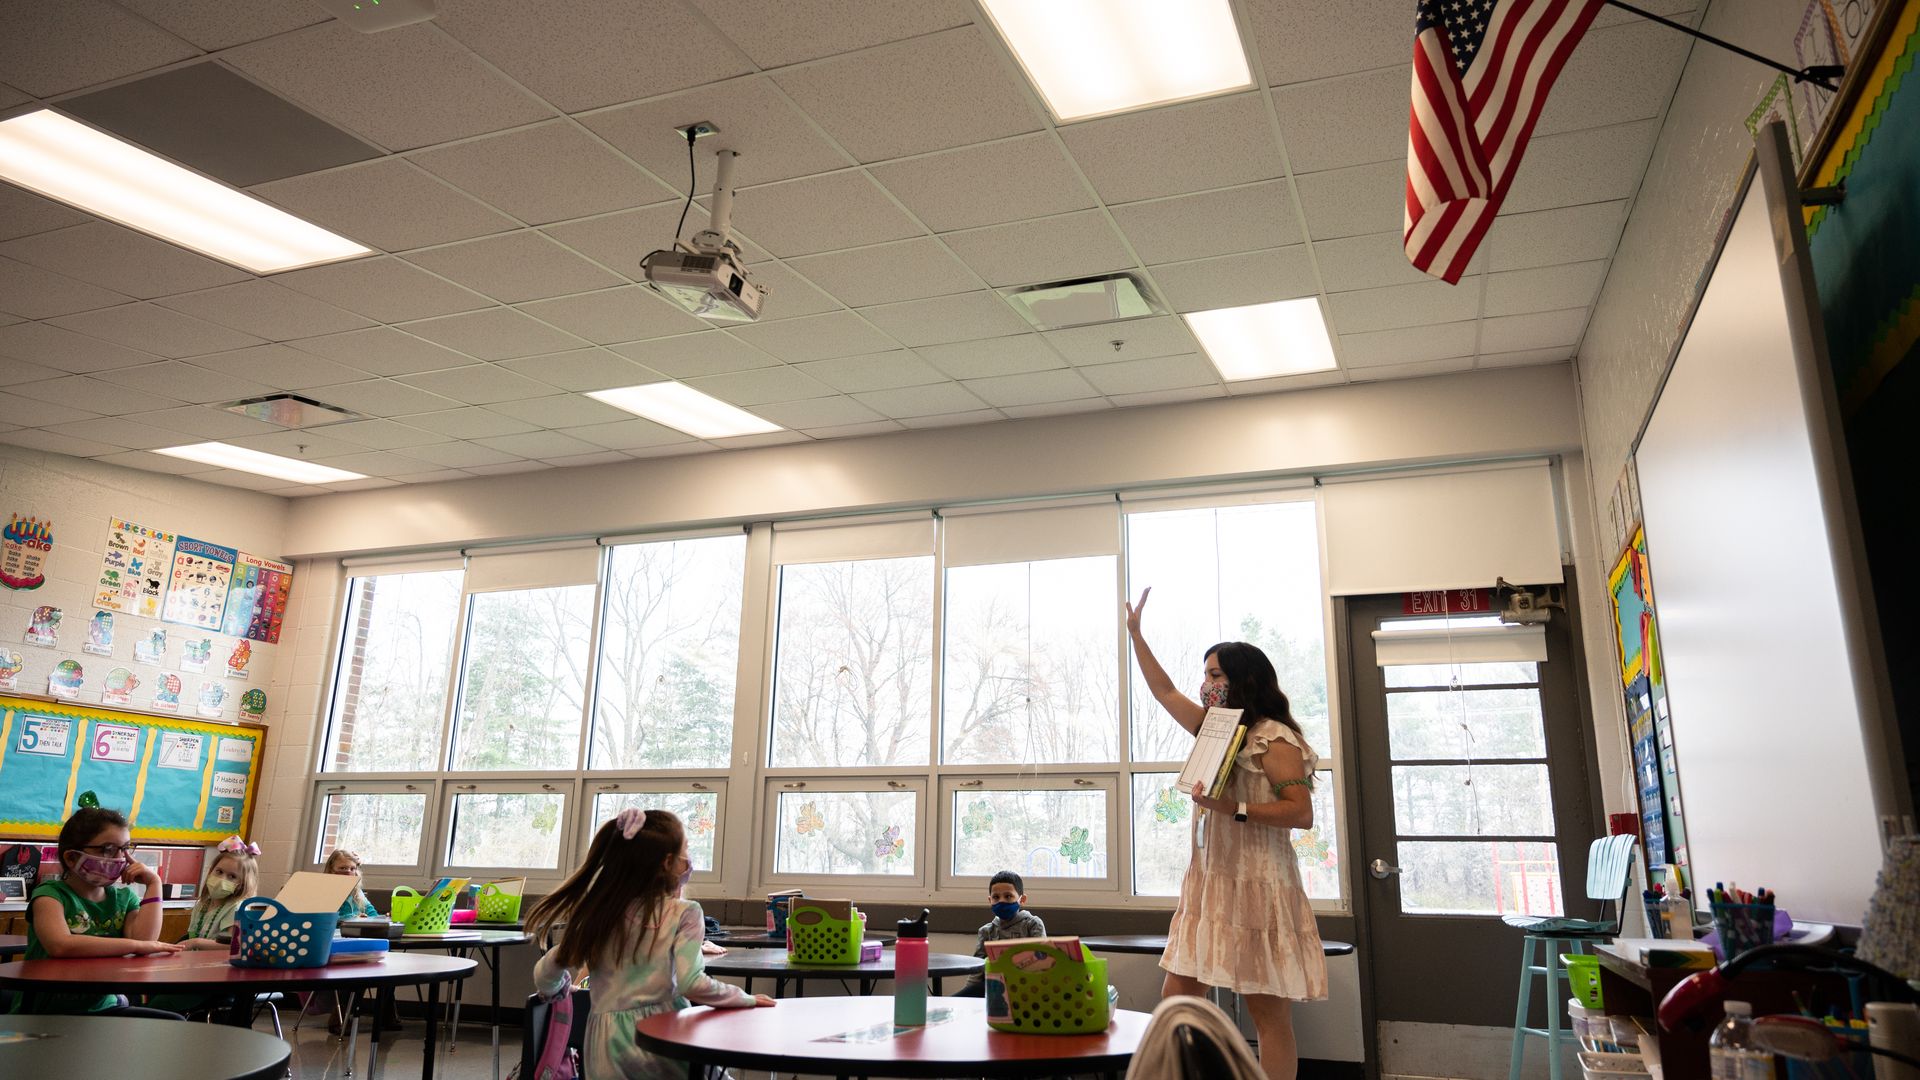 A teacher stands in front of a whiteboard raising her hand as she speaks to young students in a brightly lit classroom.